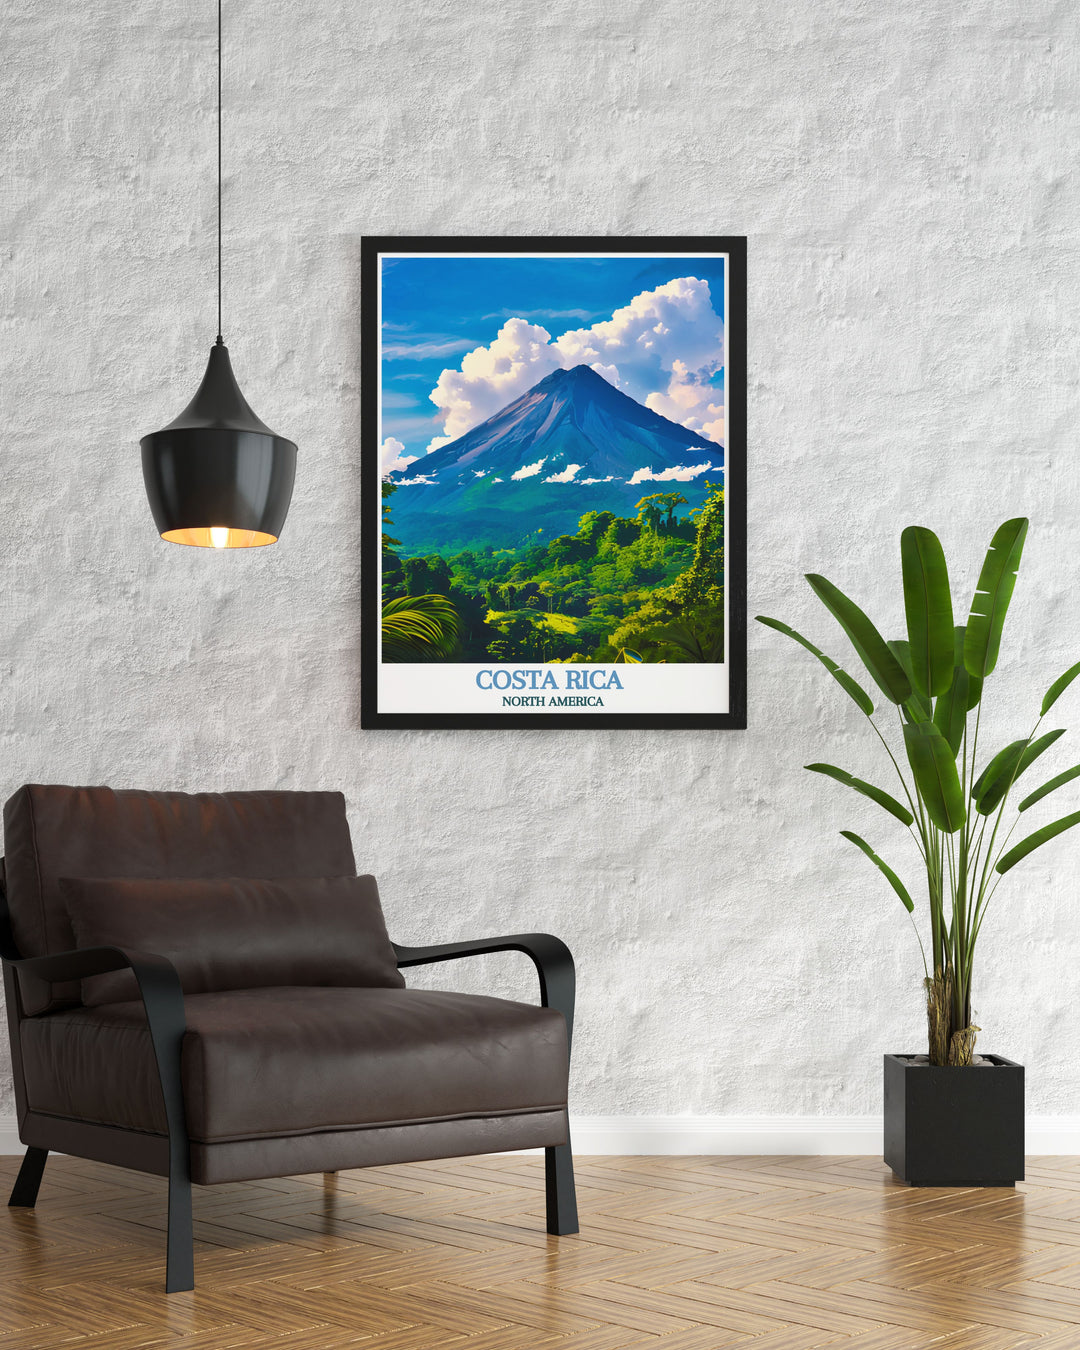 Celebrate the natural splendor of Costa Rica with a fine art print of Arenal Volcano. This artwork reflects the majestic charm and vibrant ecosystem of the volcano, making it a captivating focal point for any decor.